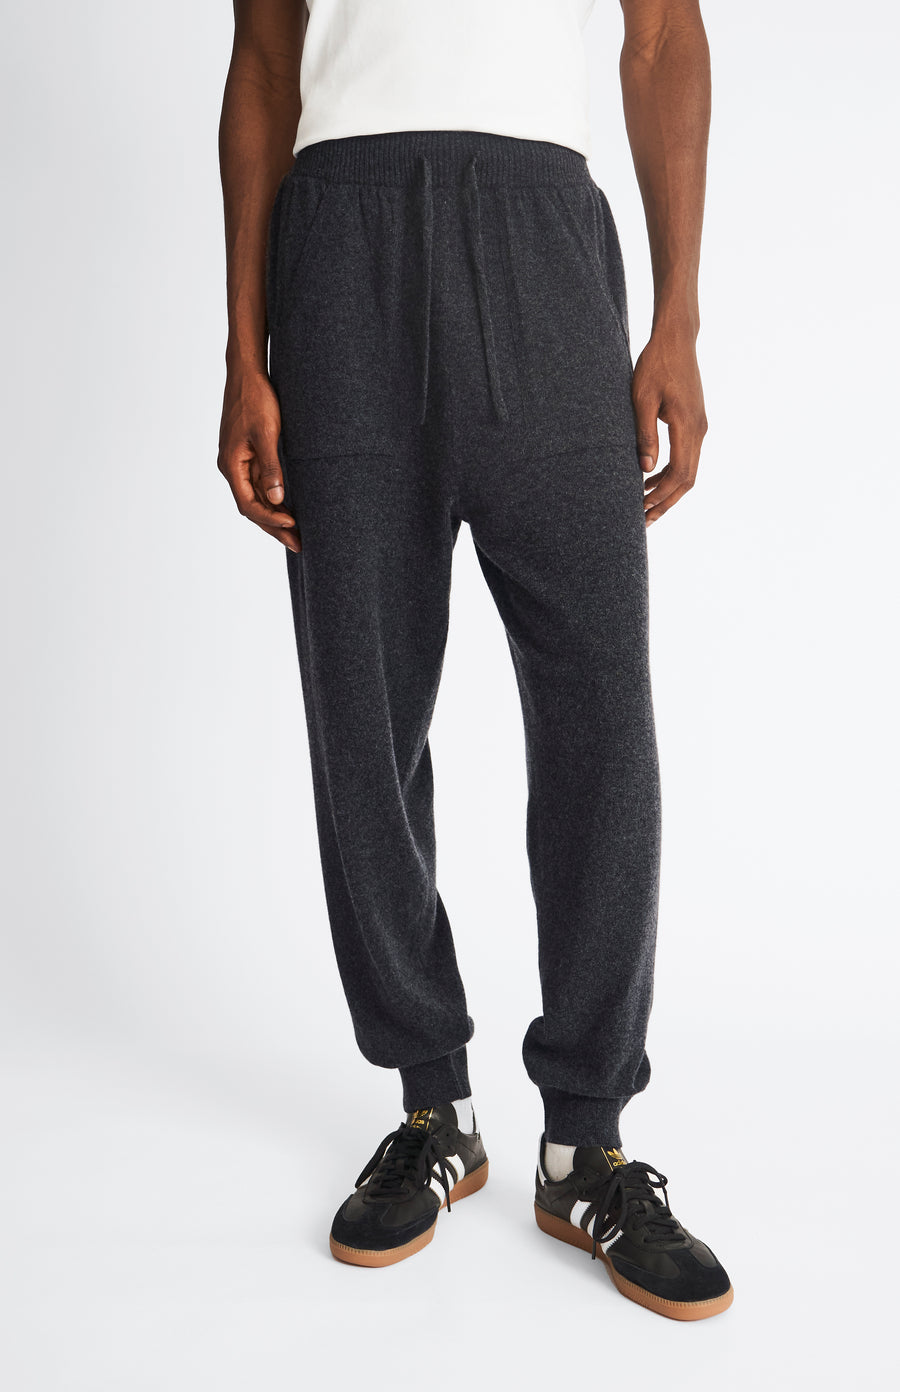 Pringle of Scotland Men's Knitted Merino Cashmere Joggers In Charcoal on model